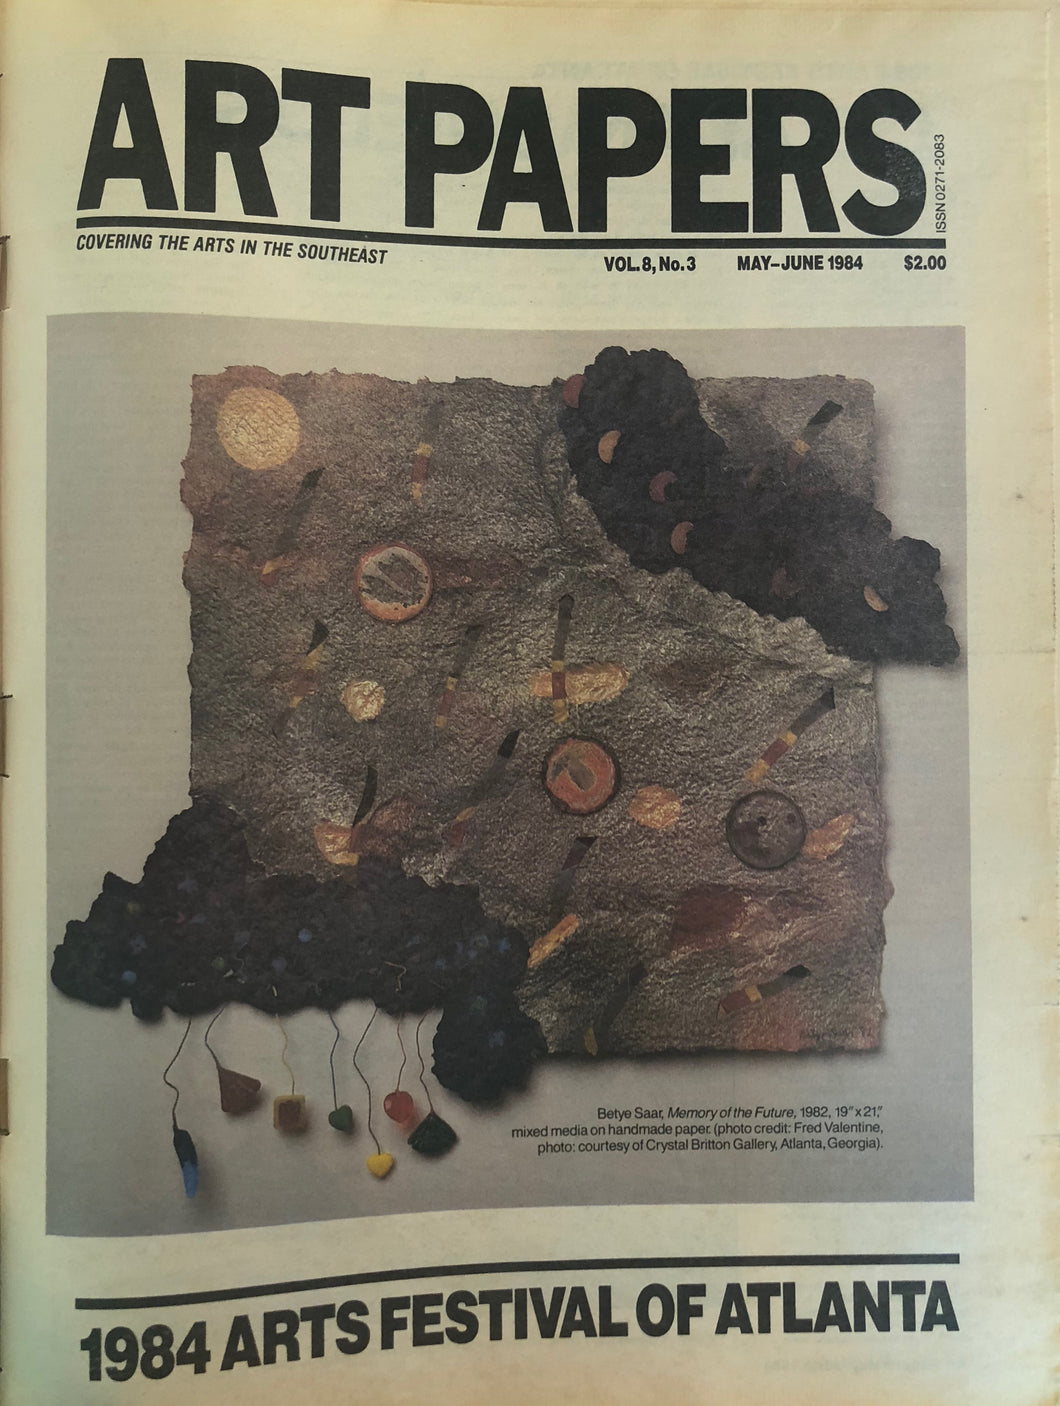 ART PAPERS 08.03 - May/June 1984 - SOLD OUT